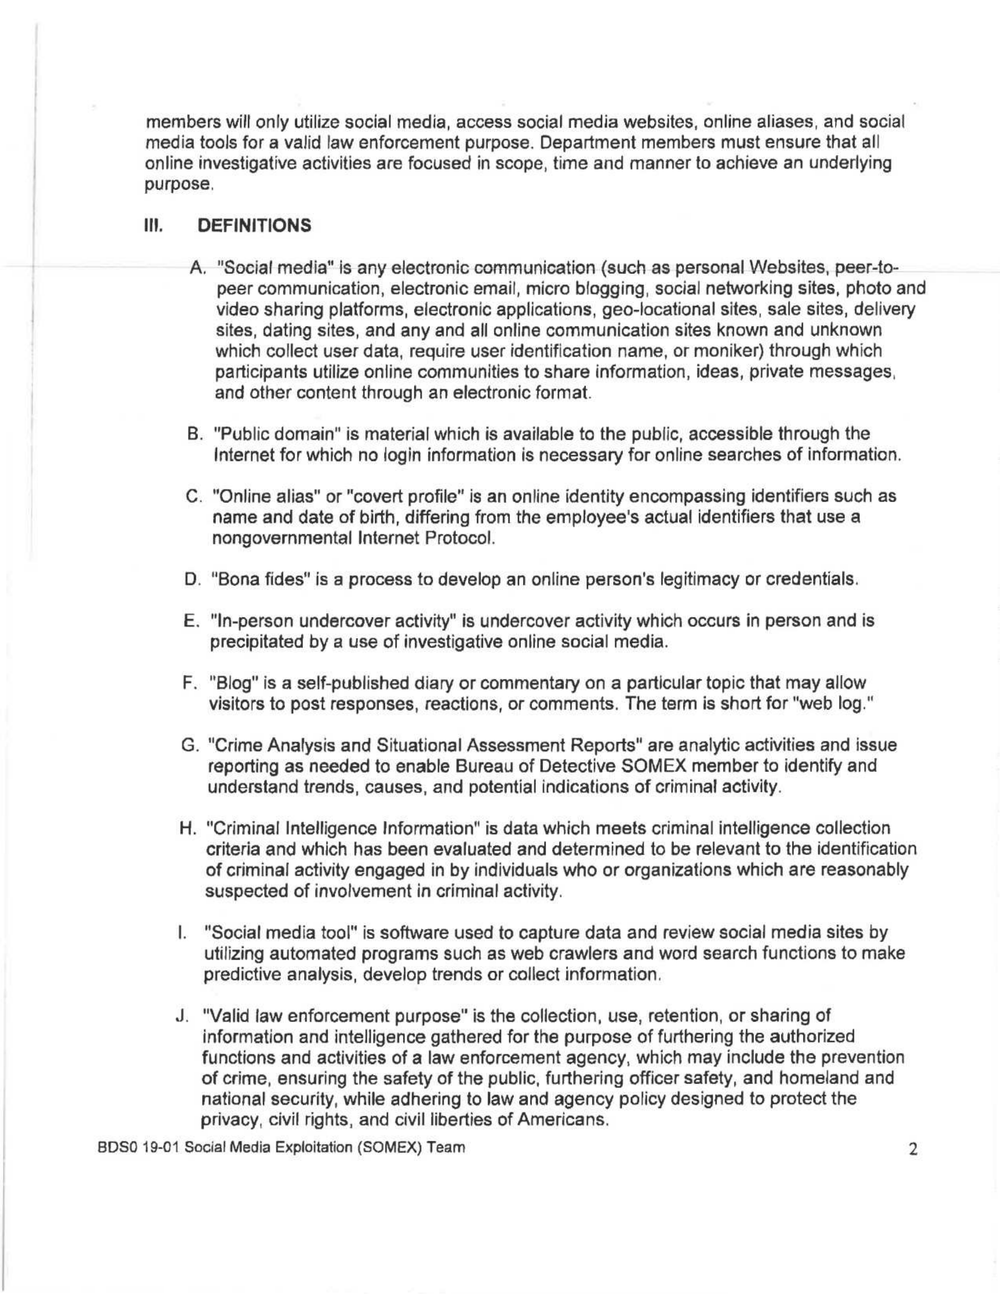 Page 2 from Chicago Police Social Media Exploitation Somex Policy